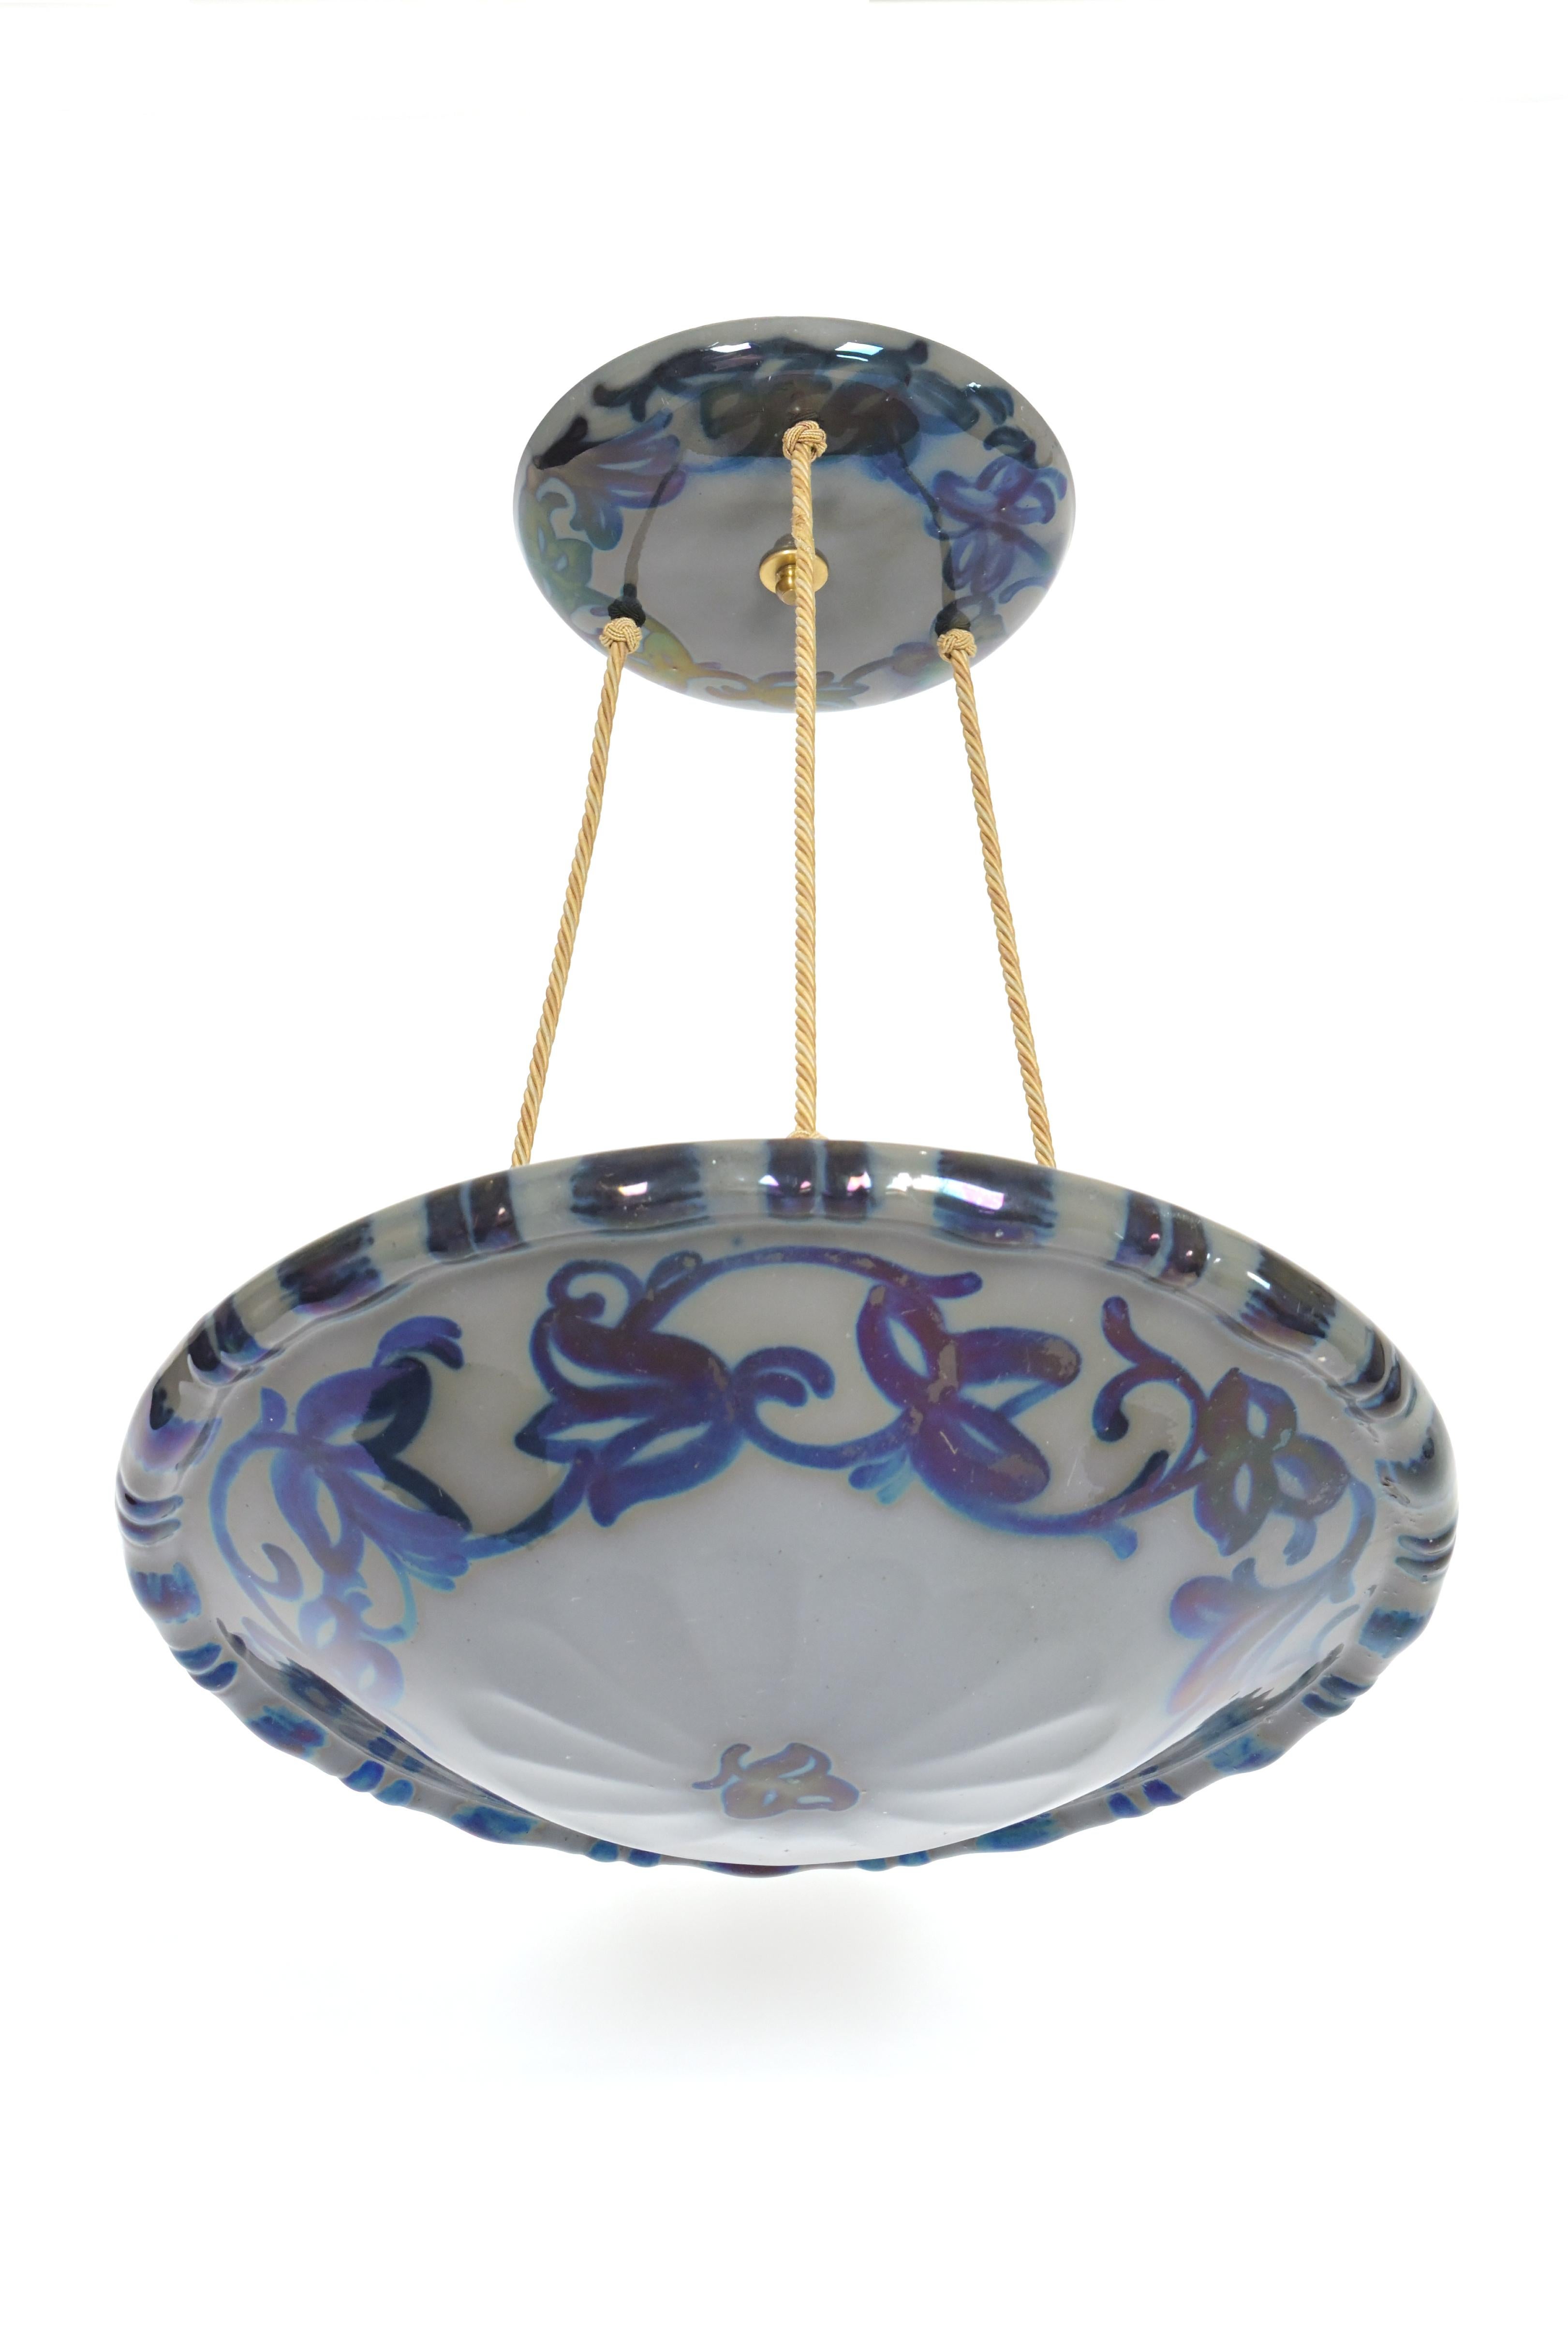 A two disc pendant light designed by Swedish artist Edgar Böckman (1890-1981). Made of two earthenware discs with detailed painted blue floral patterns and striping suspended on three silk wire rope cords. circa 1930s. Newly Wired. Three Edison